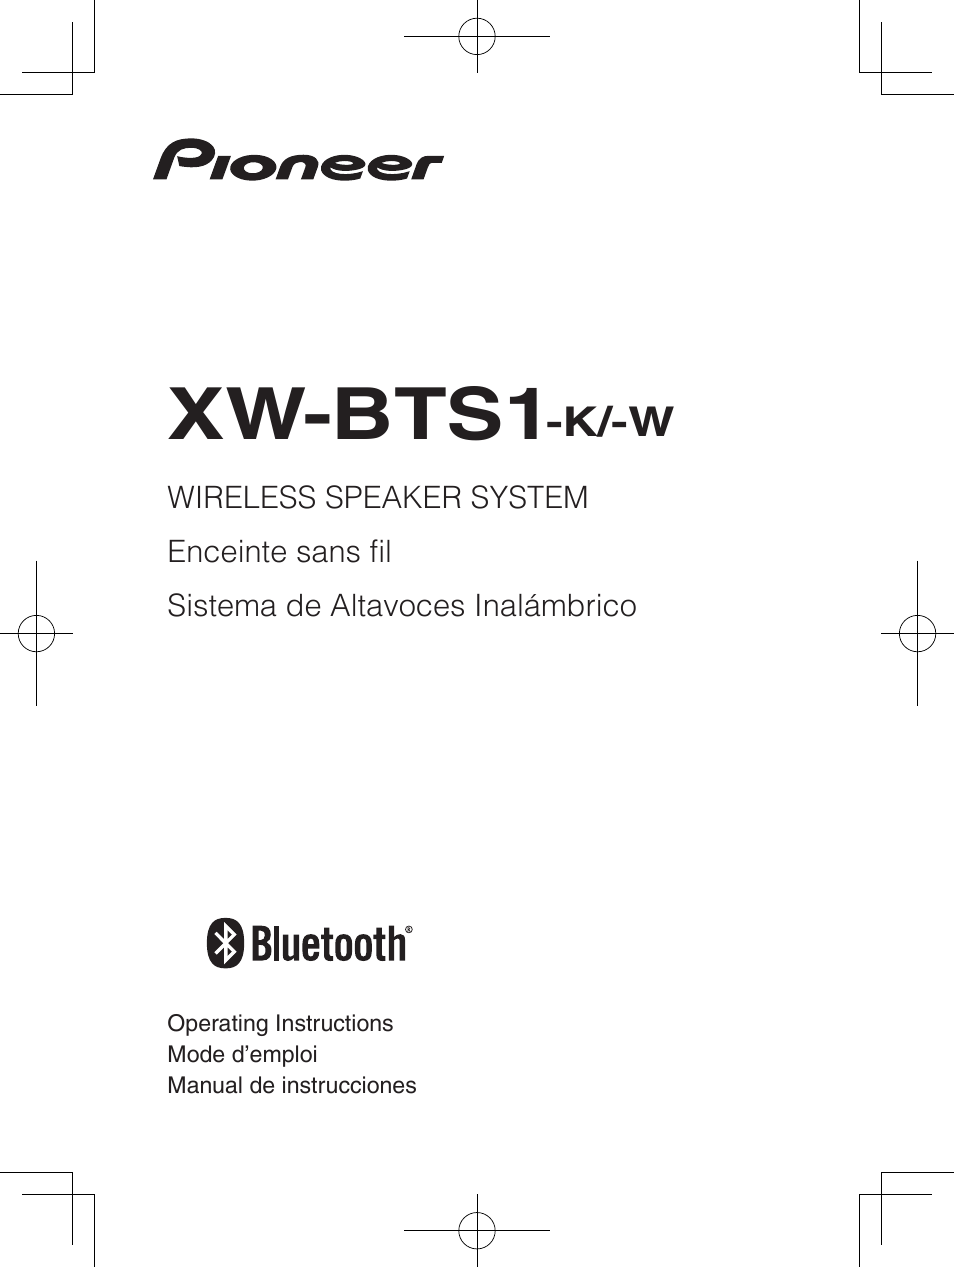 Pioneer XW-BTS1-K User Manual | 60 pages | Also for: XW-BTS1-W